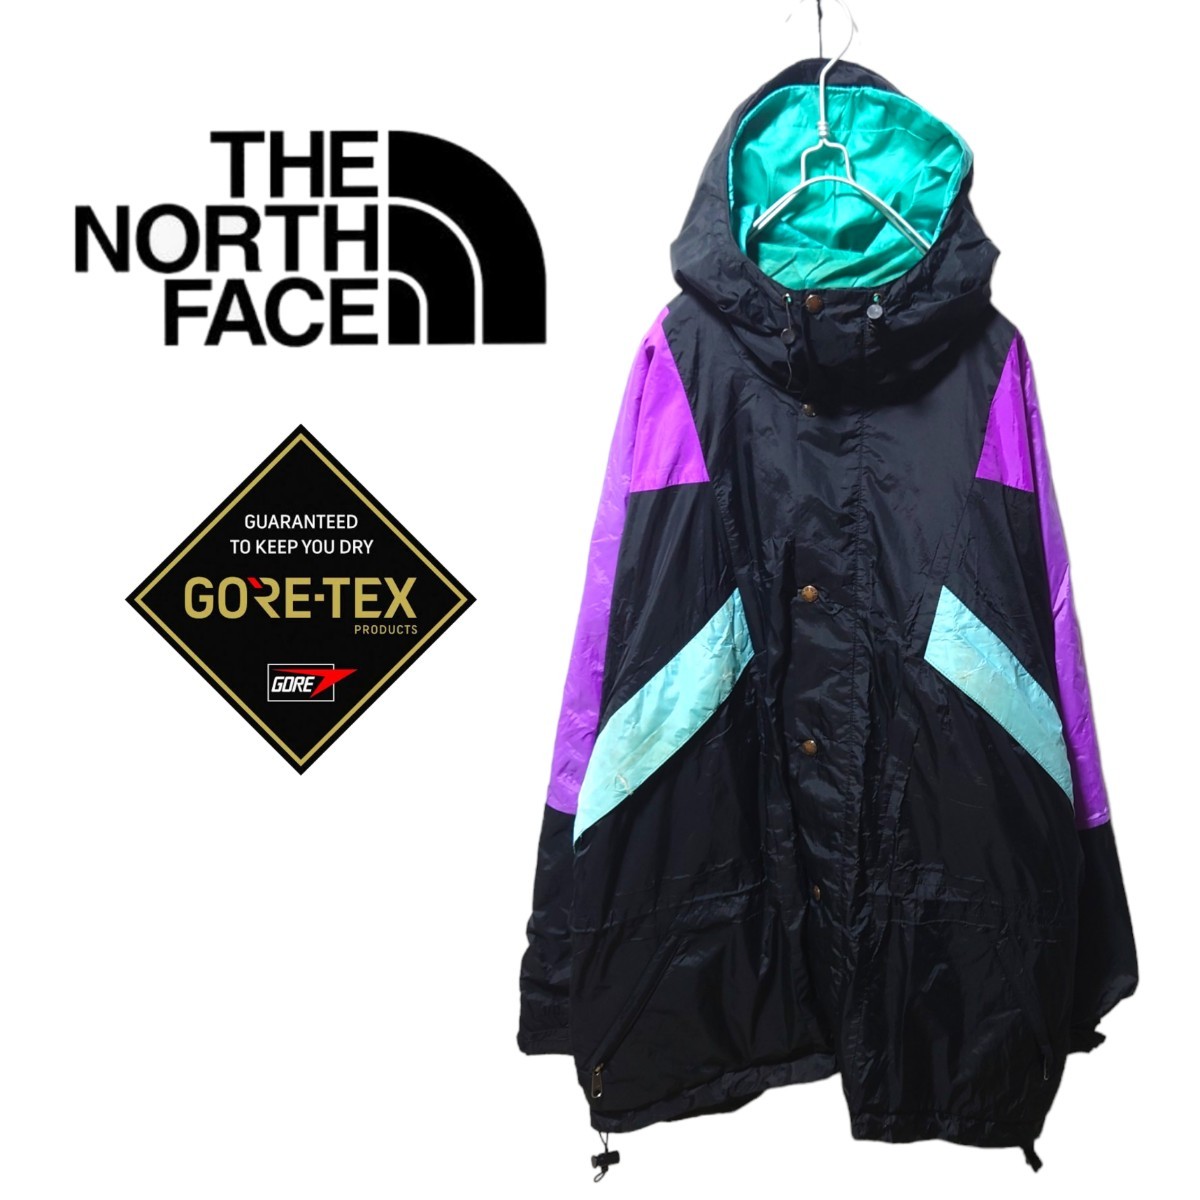 【THE NORTH FACE】GORE-TEX マウンテンパーカーA-1655